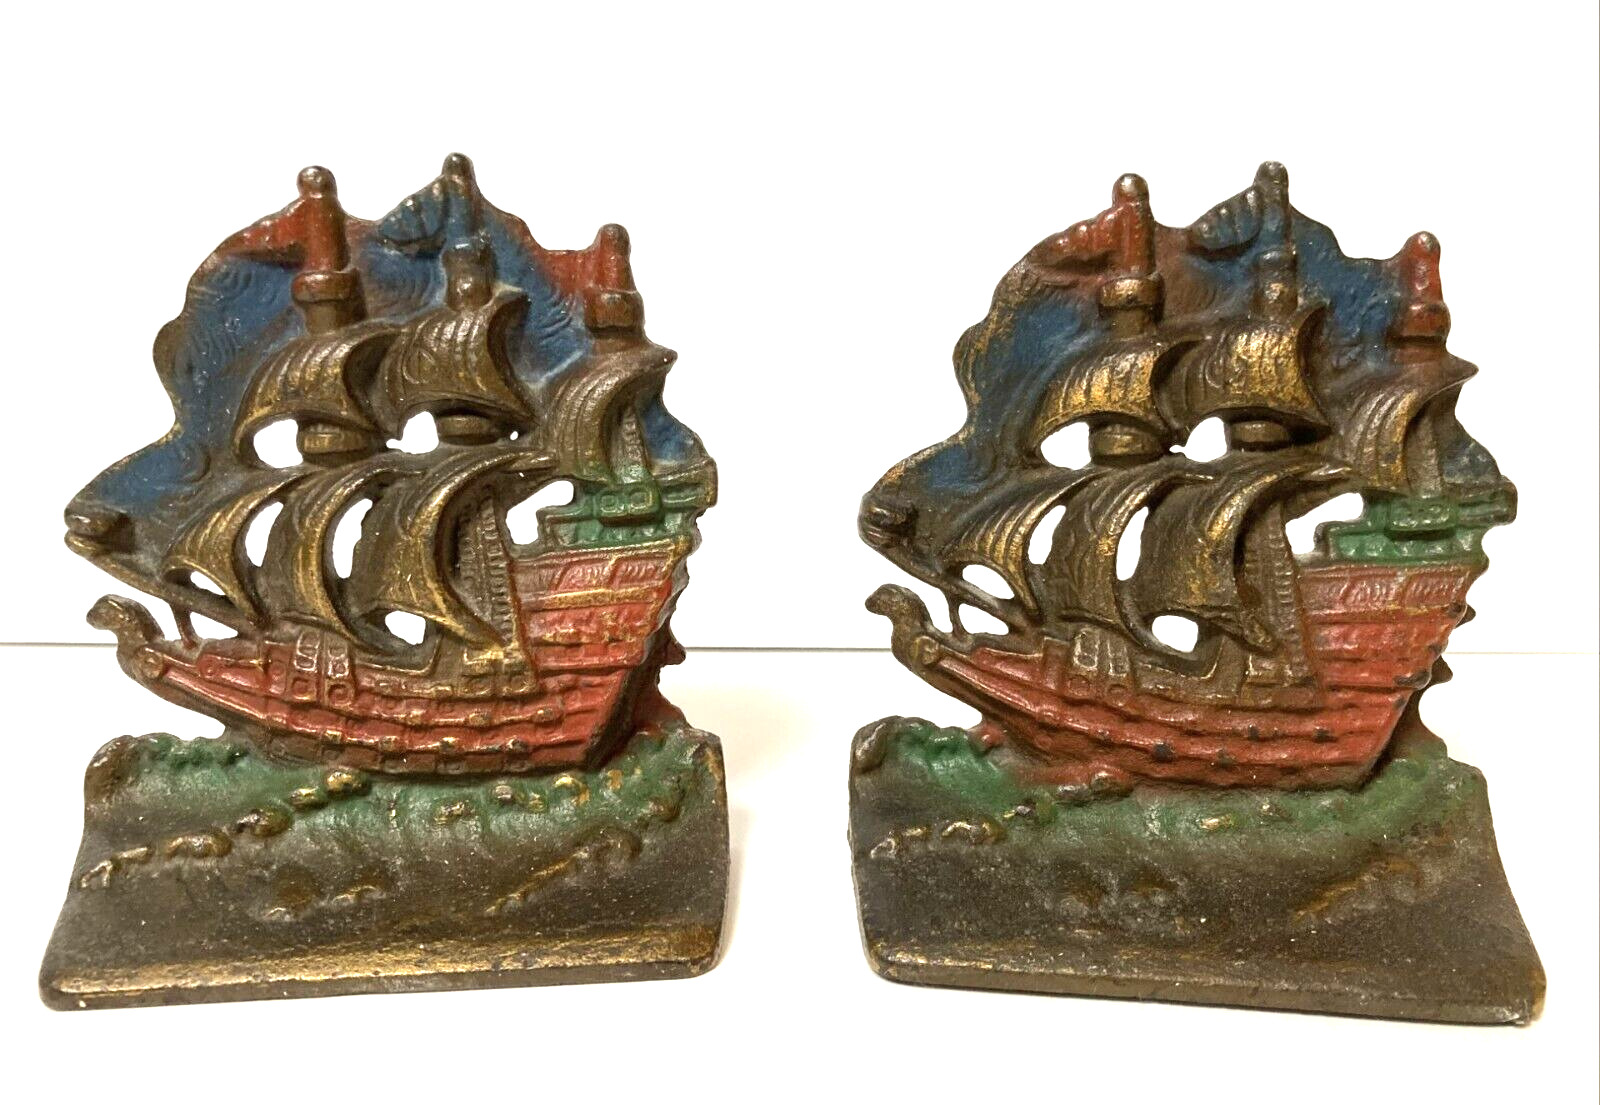 Vintage Painted Cast Iron Sailing Ship Galleon Bookends Doorstops - Muted Colors